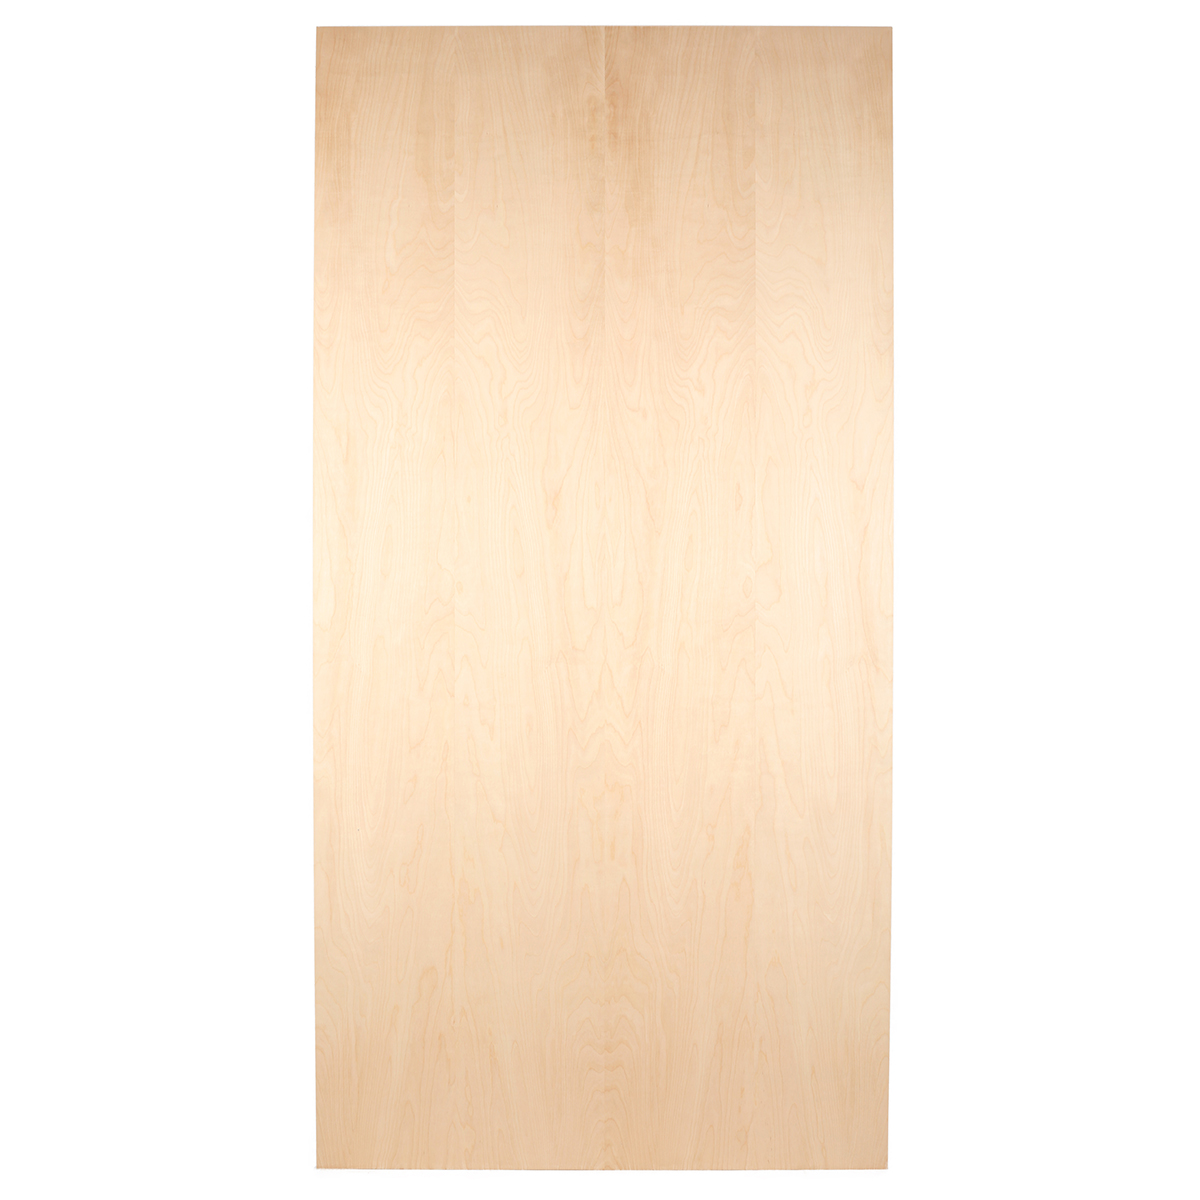 3 4 Birch 4 x8 Plywood G2S Made in USA